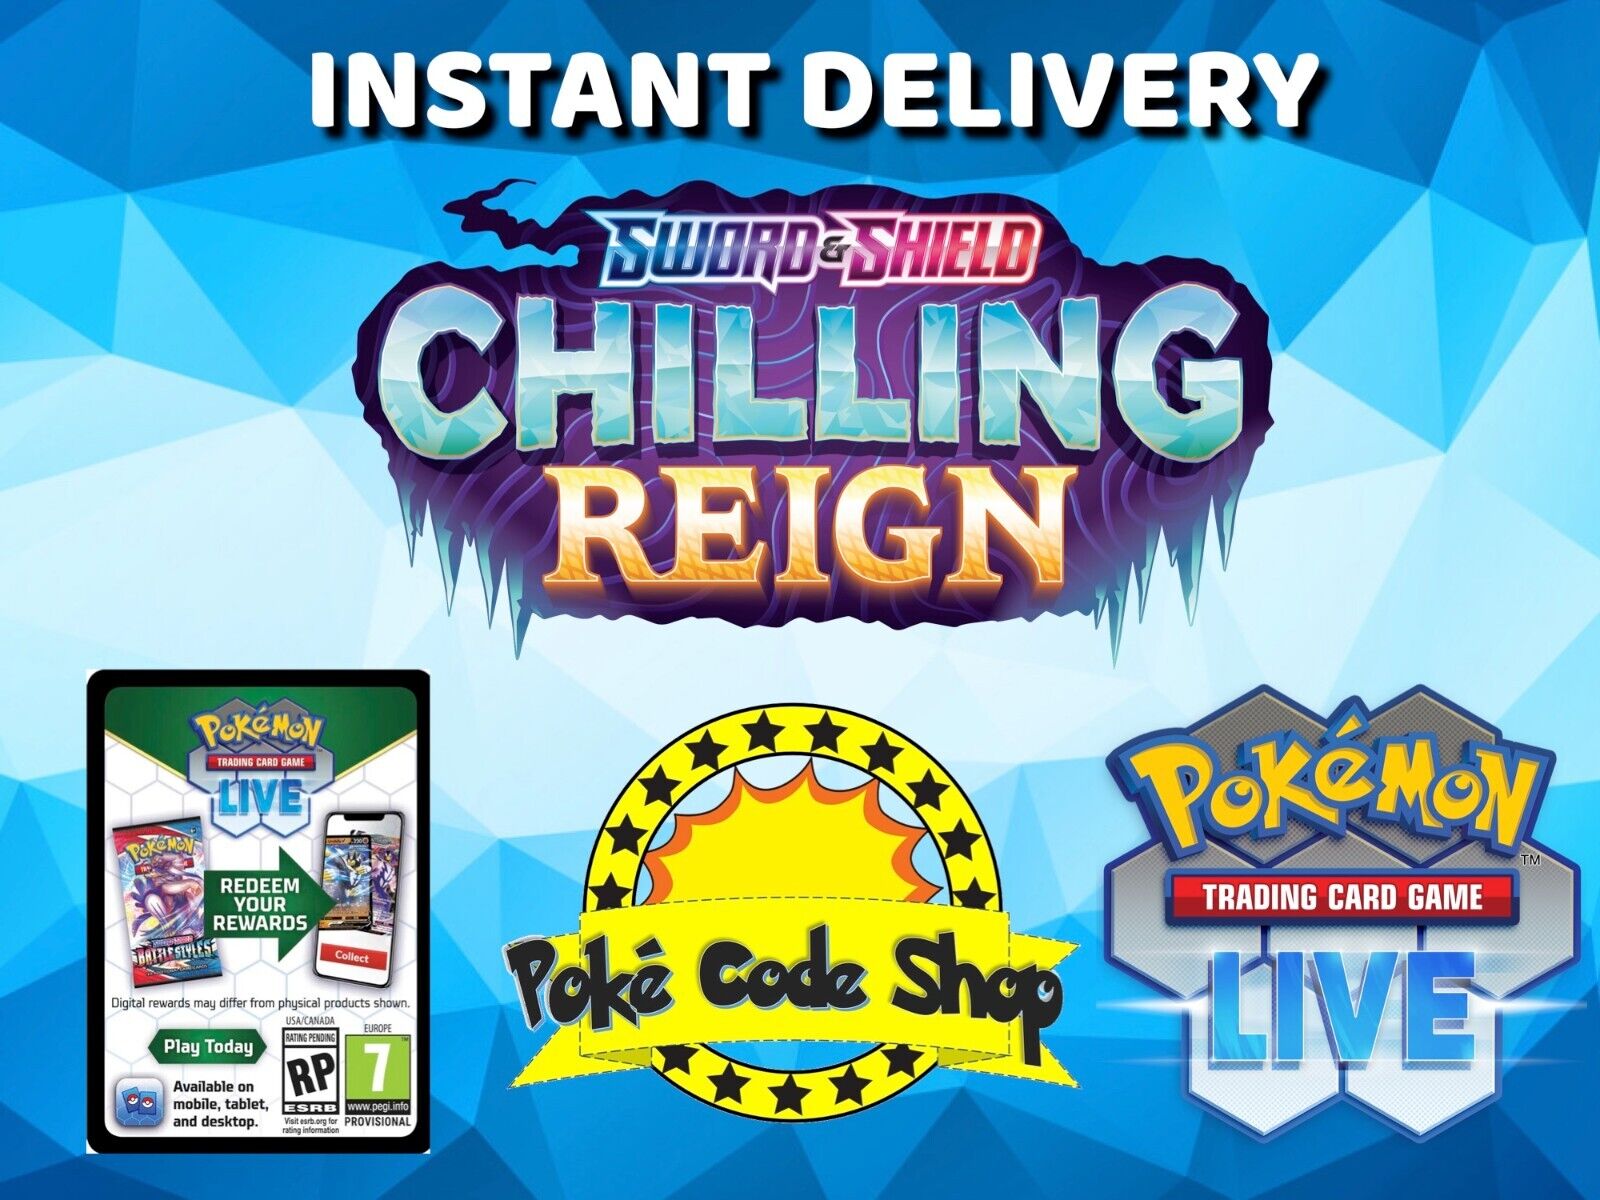 25 x CHILLING REIGN Live Pokemon Booster Codes Online INSTANT QR EMAIL DELIVERY